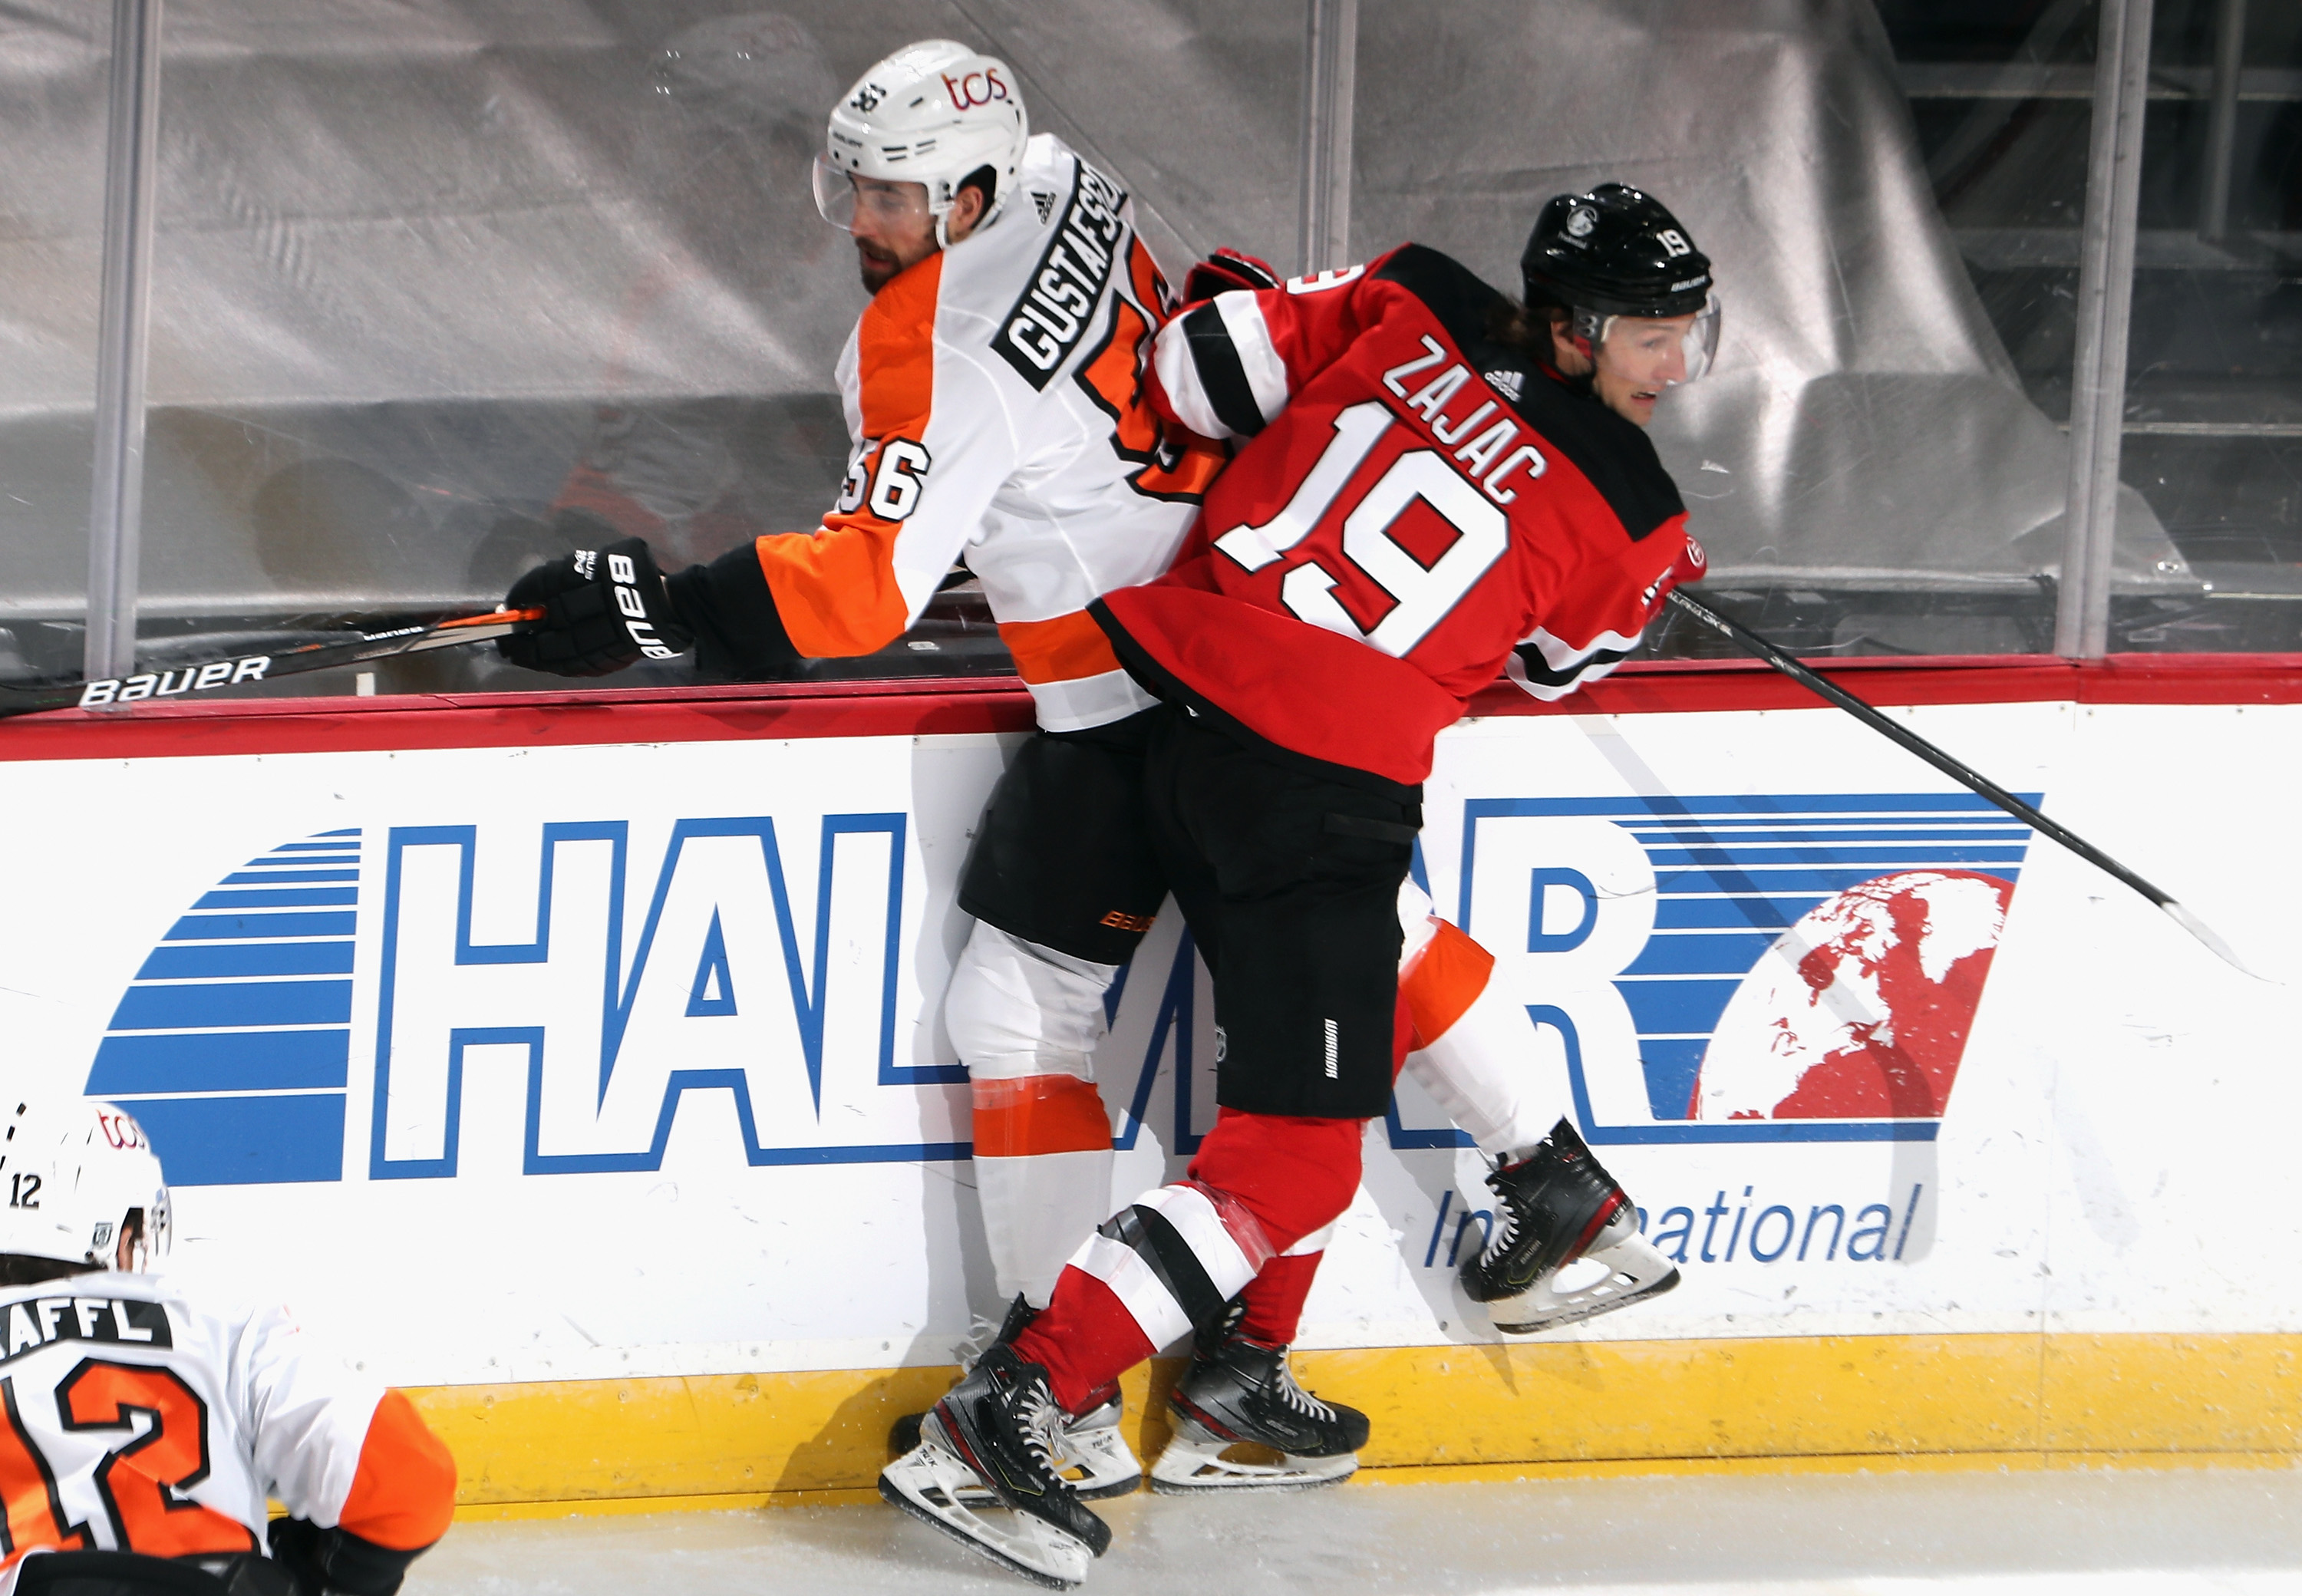 Travis Zajac: A New Defensive Weapon for New York - Drive4Five